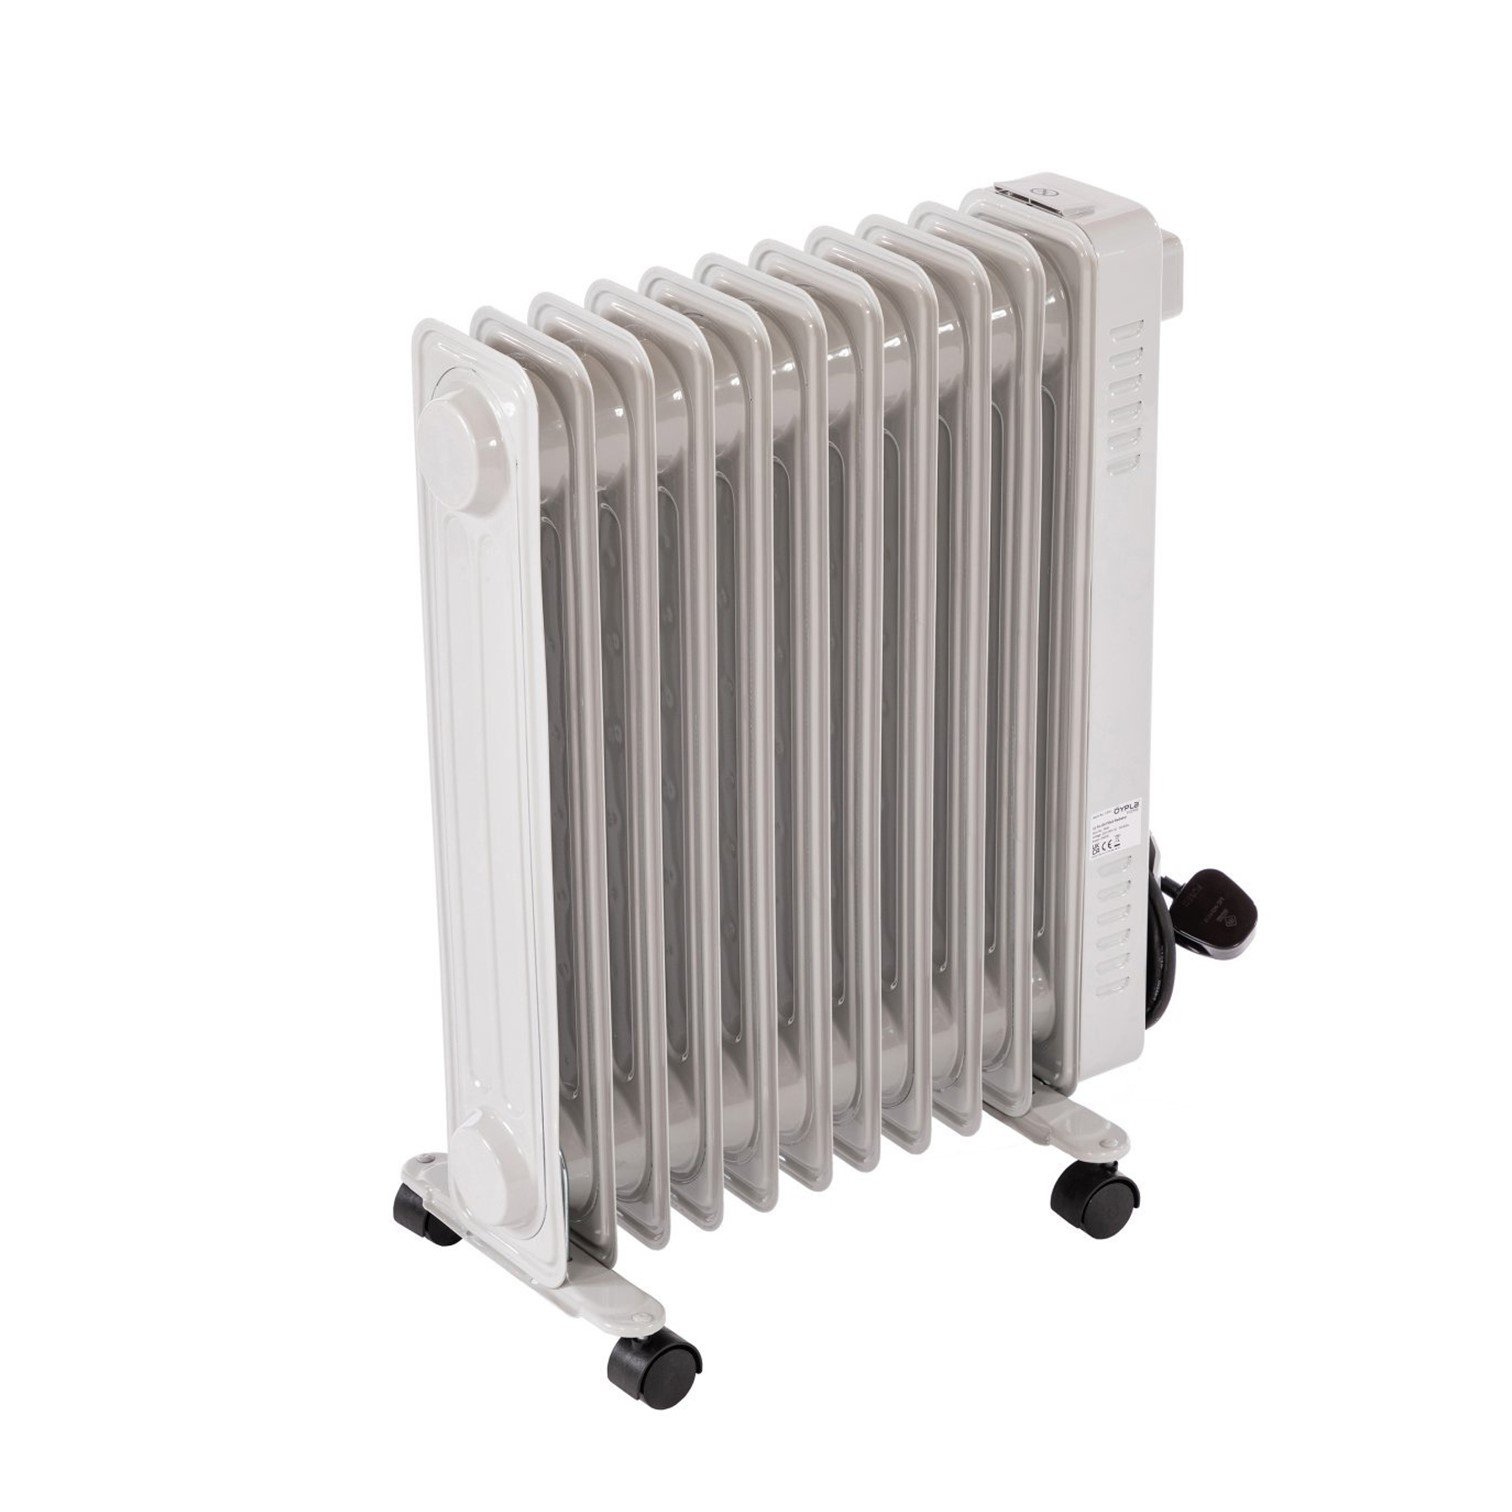 2500W 11 Fin Portable Oil Filled Radiator Electric Heater